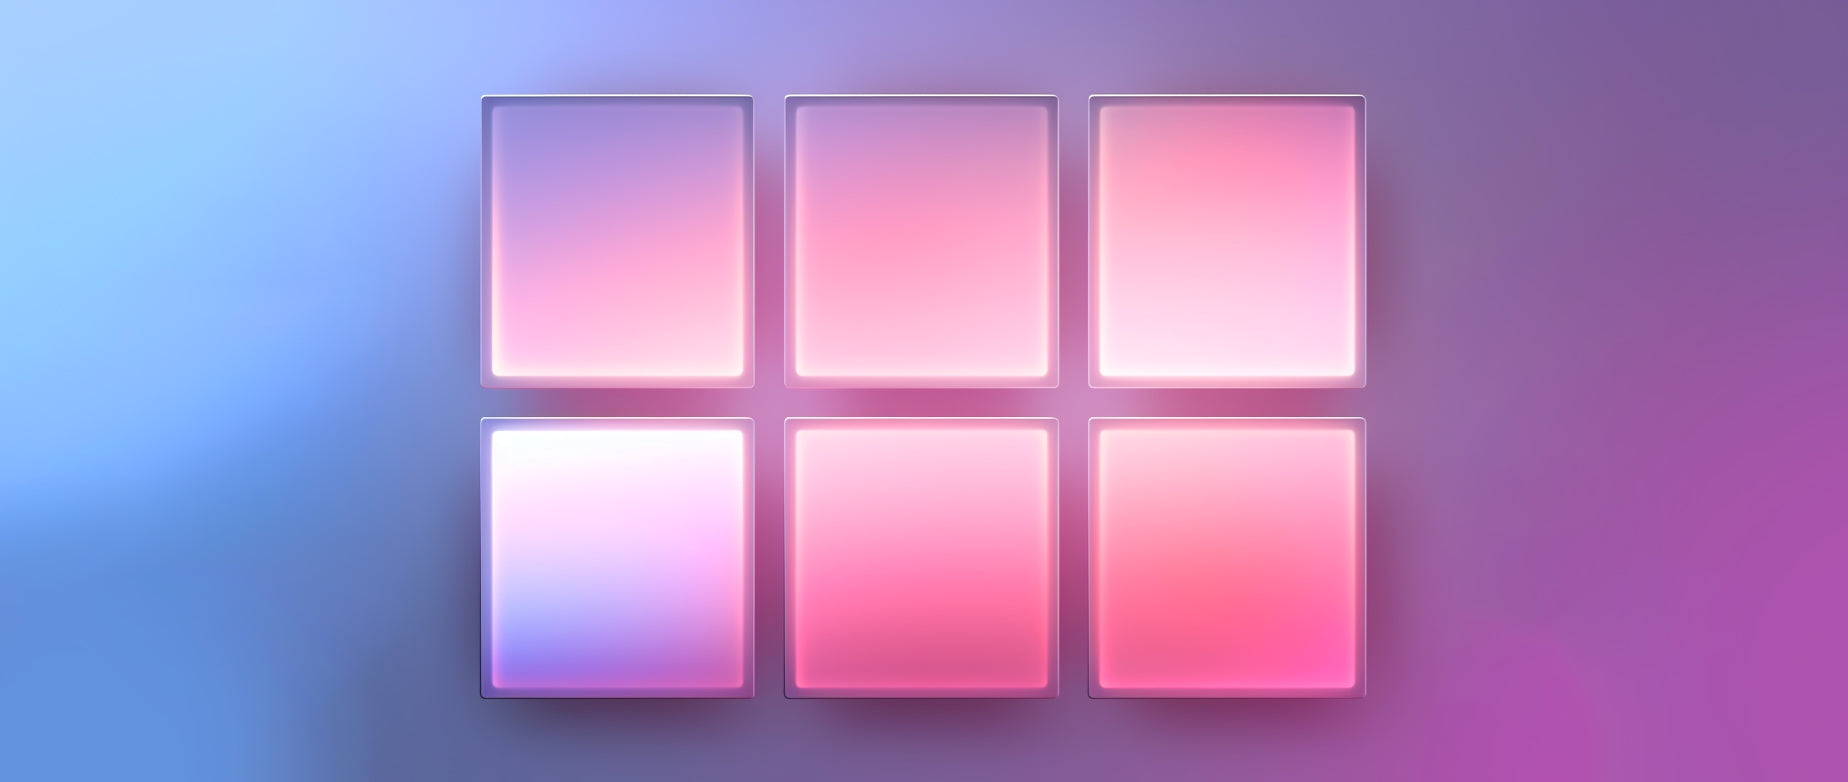 six squares that are varying shades of pink: product design